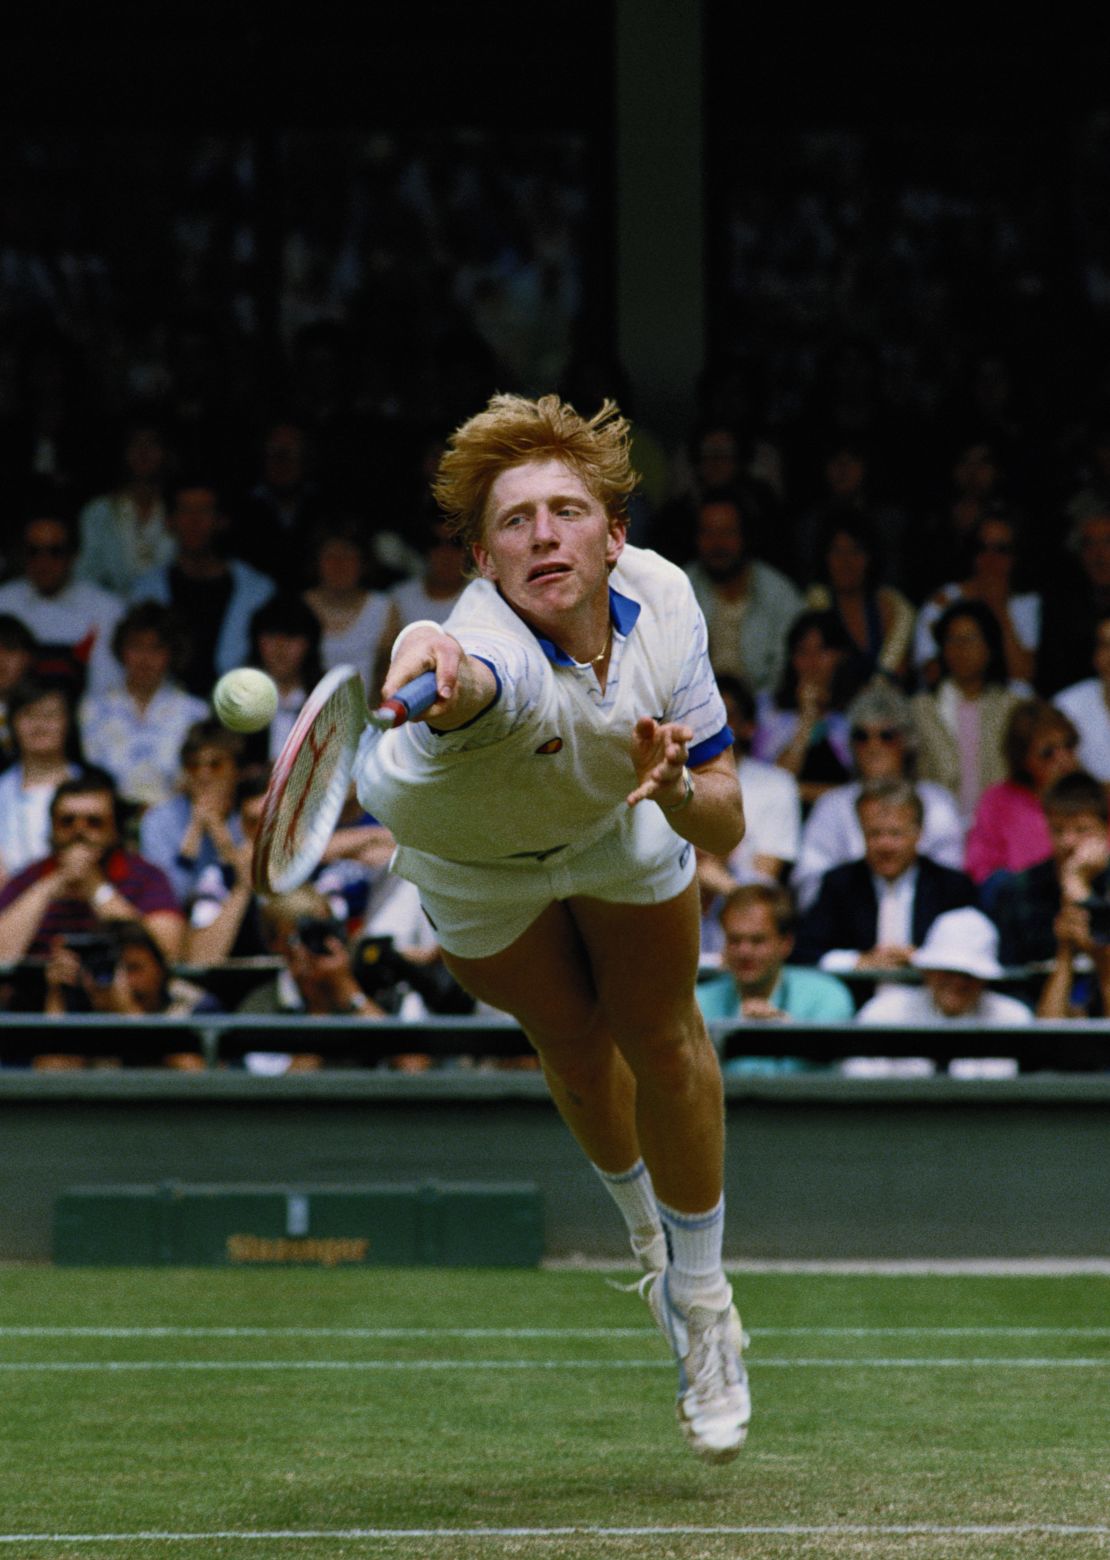 Boris Becker stretches for a shot against Anders Järryd in the 1985 Wimbledon semifinal.